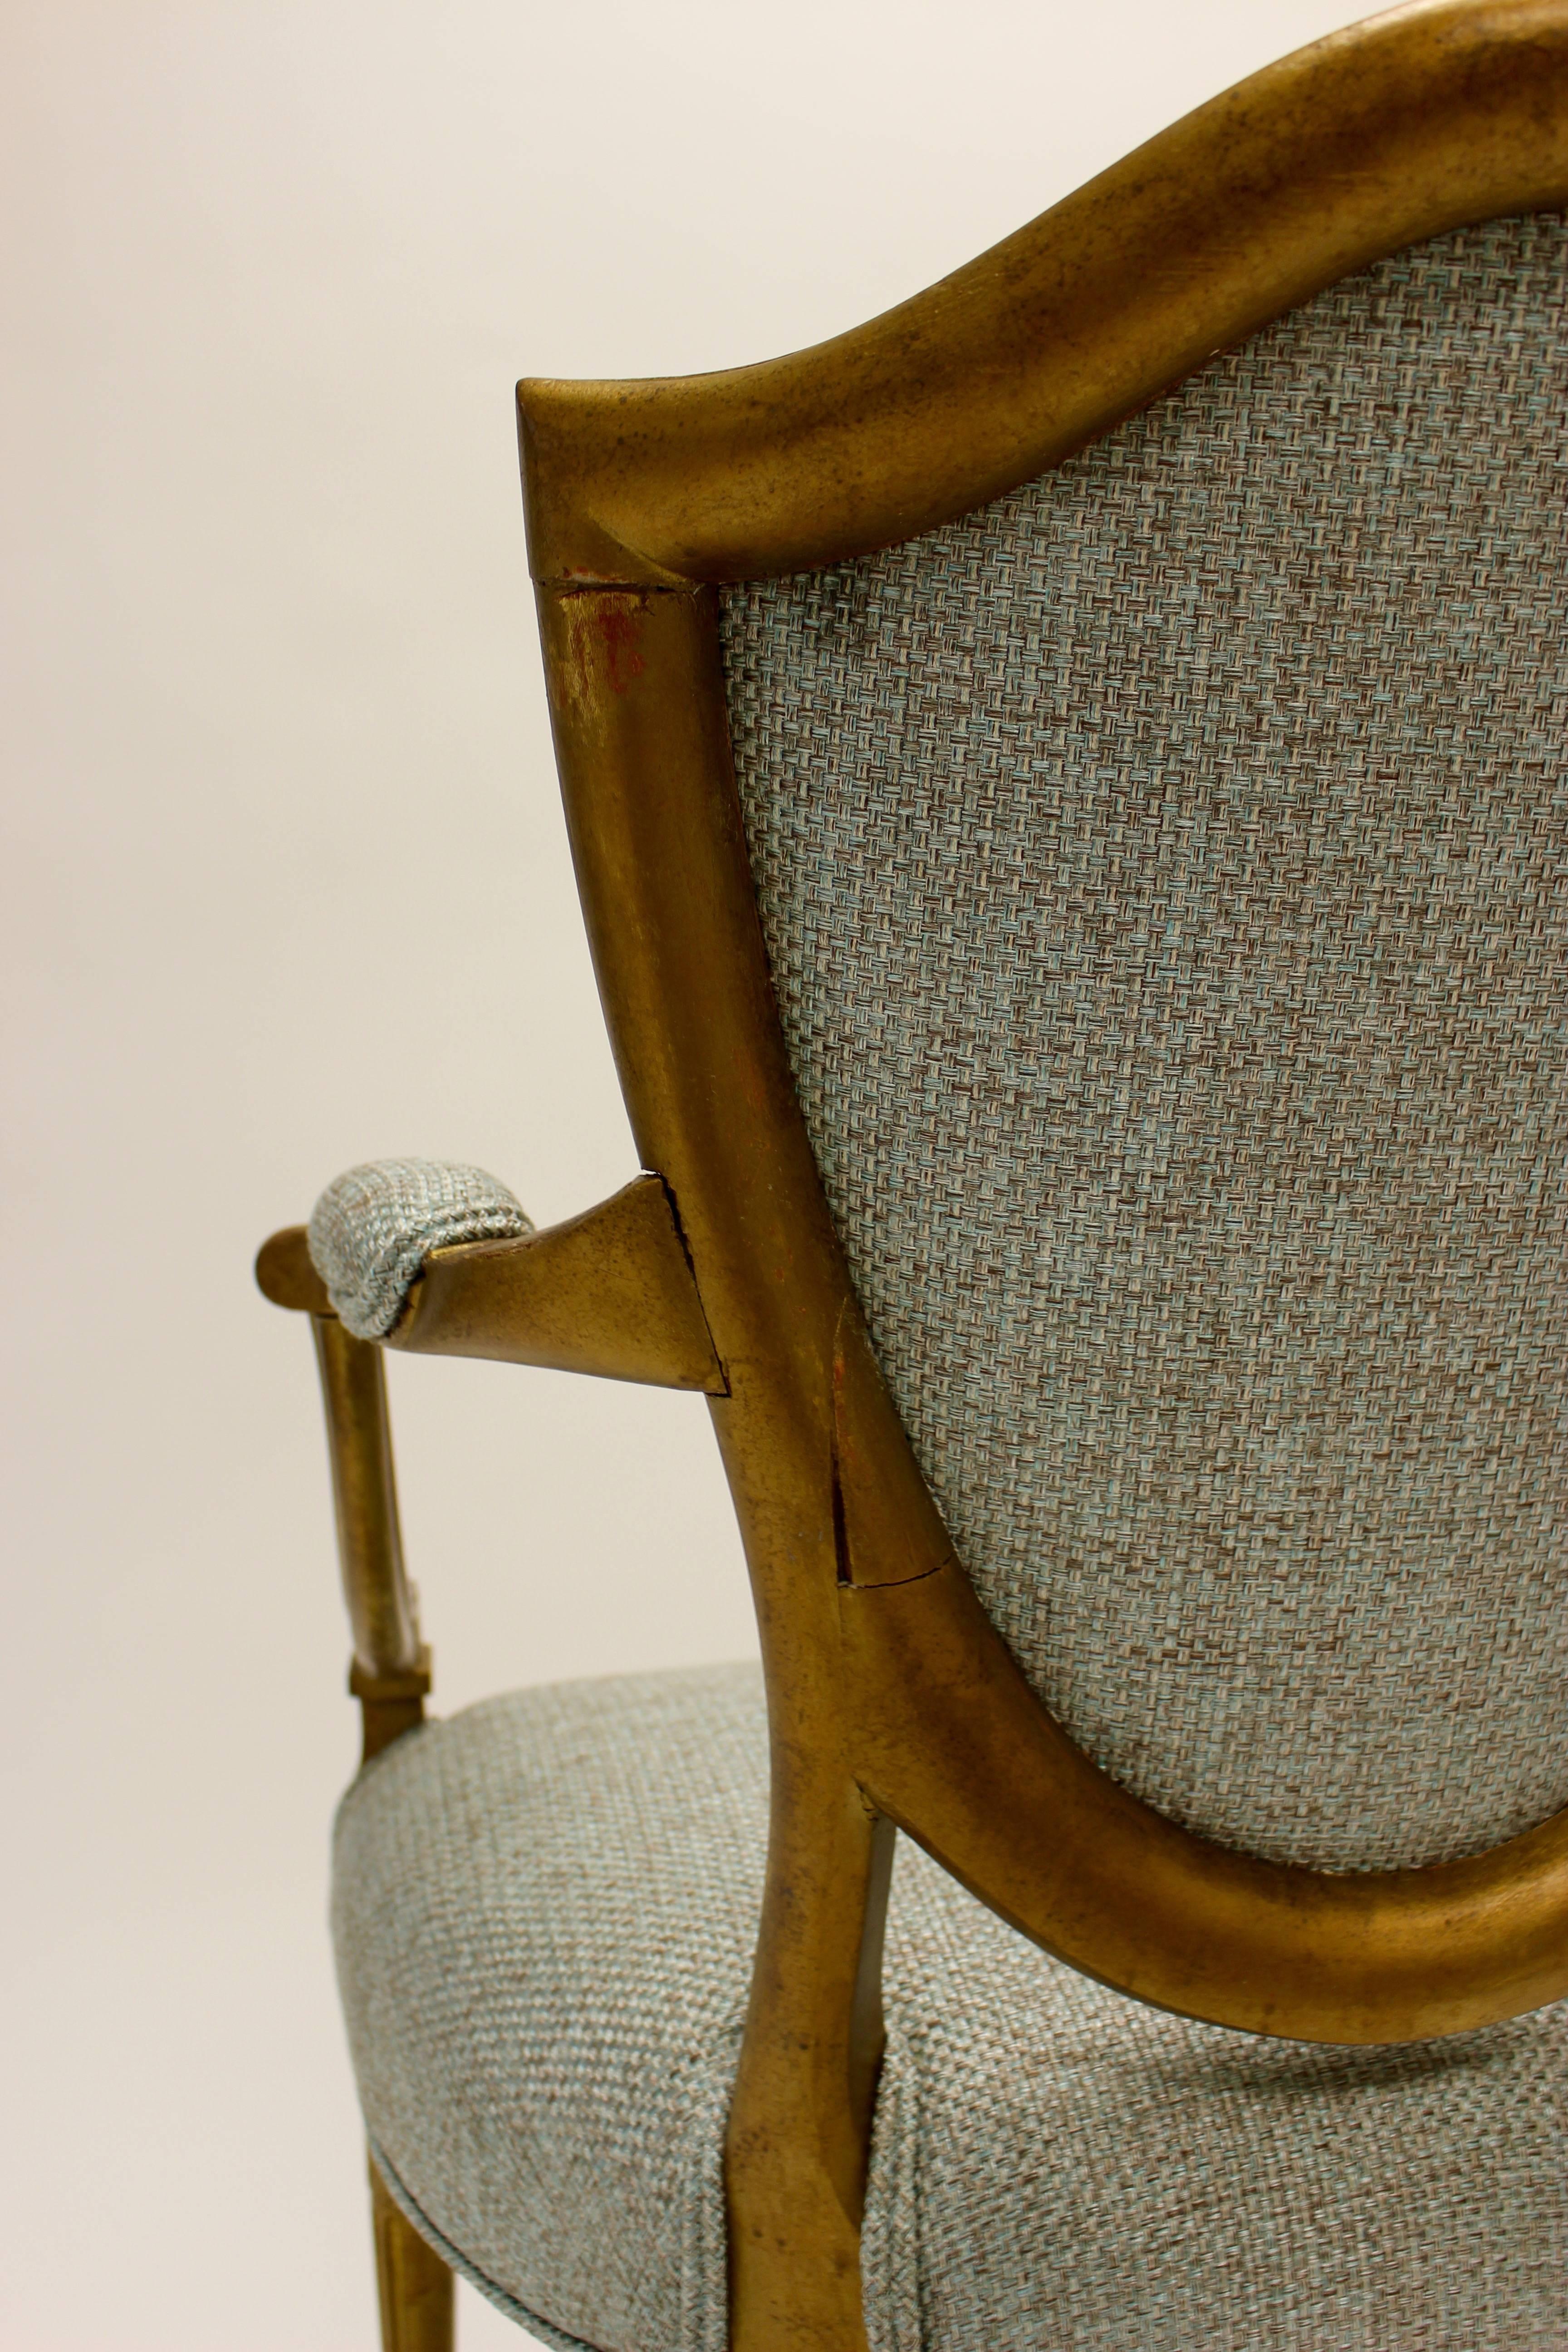 Upholstery 19th Century Hepplewhite Style Shield-Back Parcel-Gilt Armchair with Open Arms